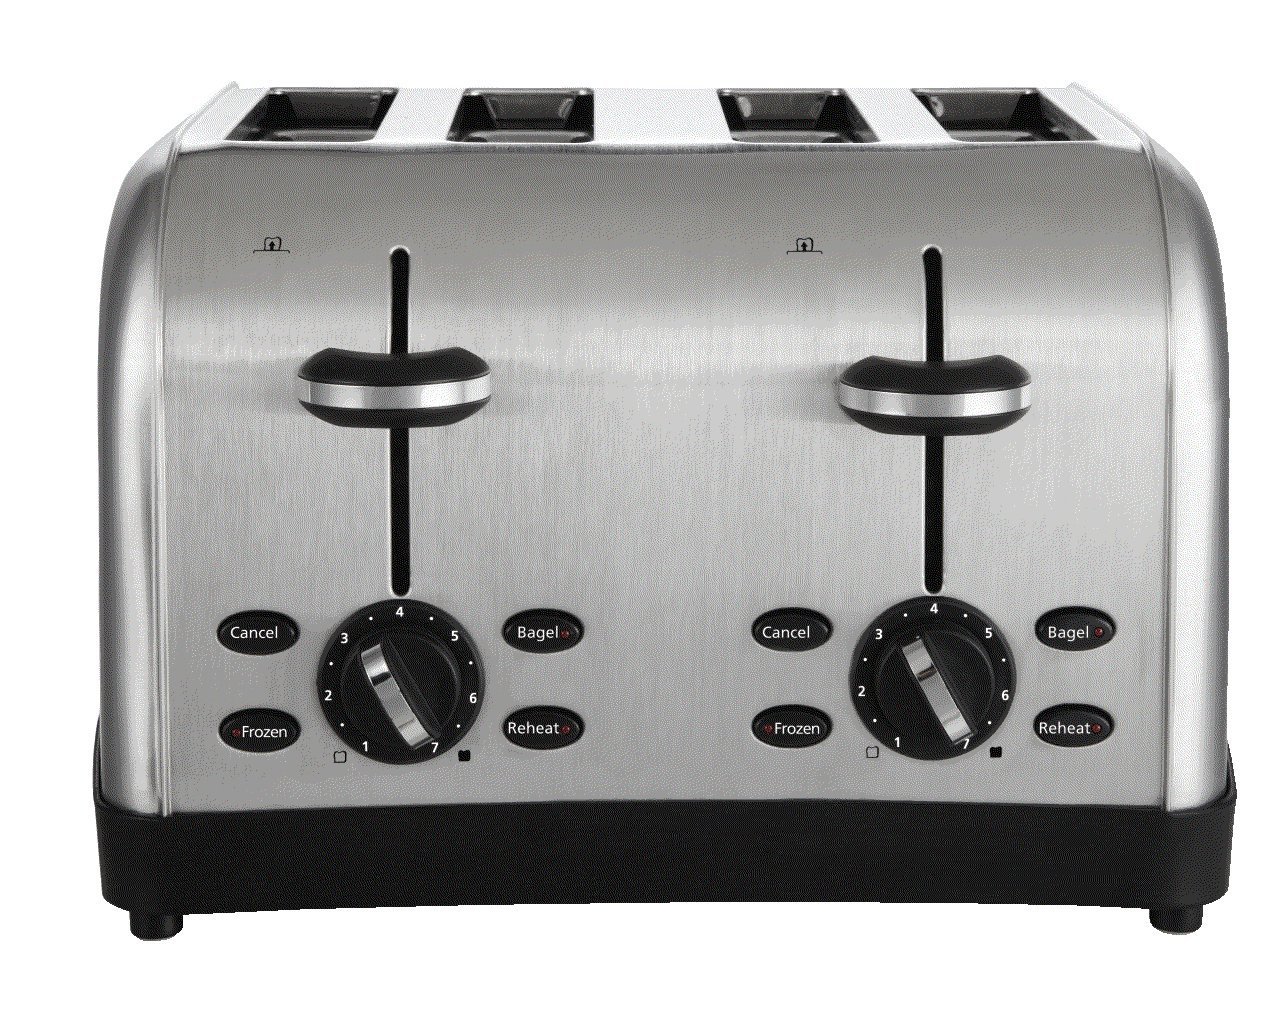 Oster 4-Slice Toaster – Just $15.98!